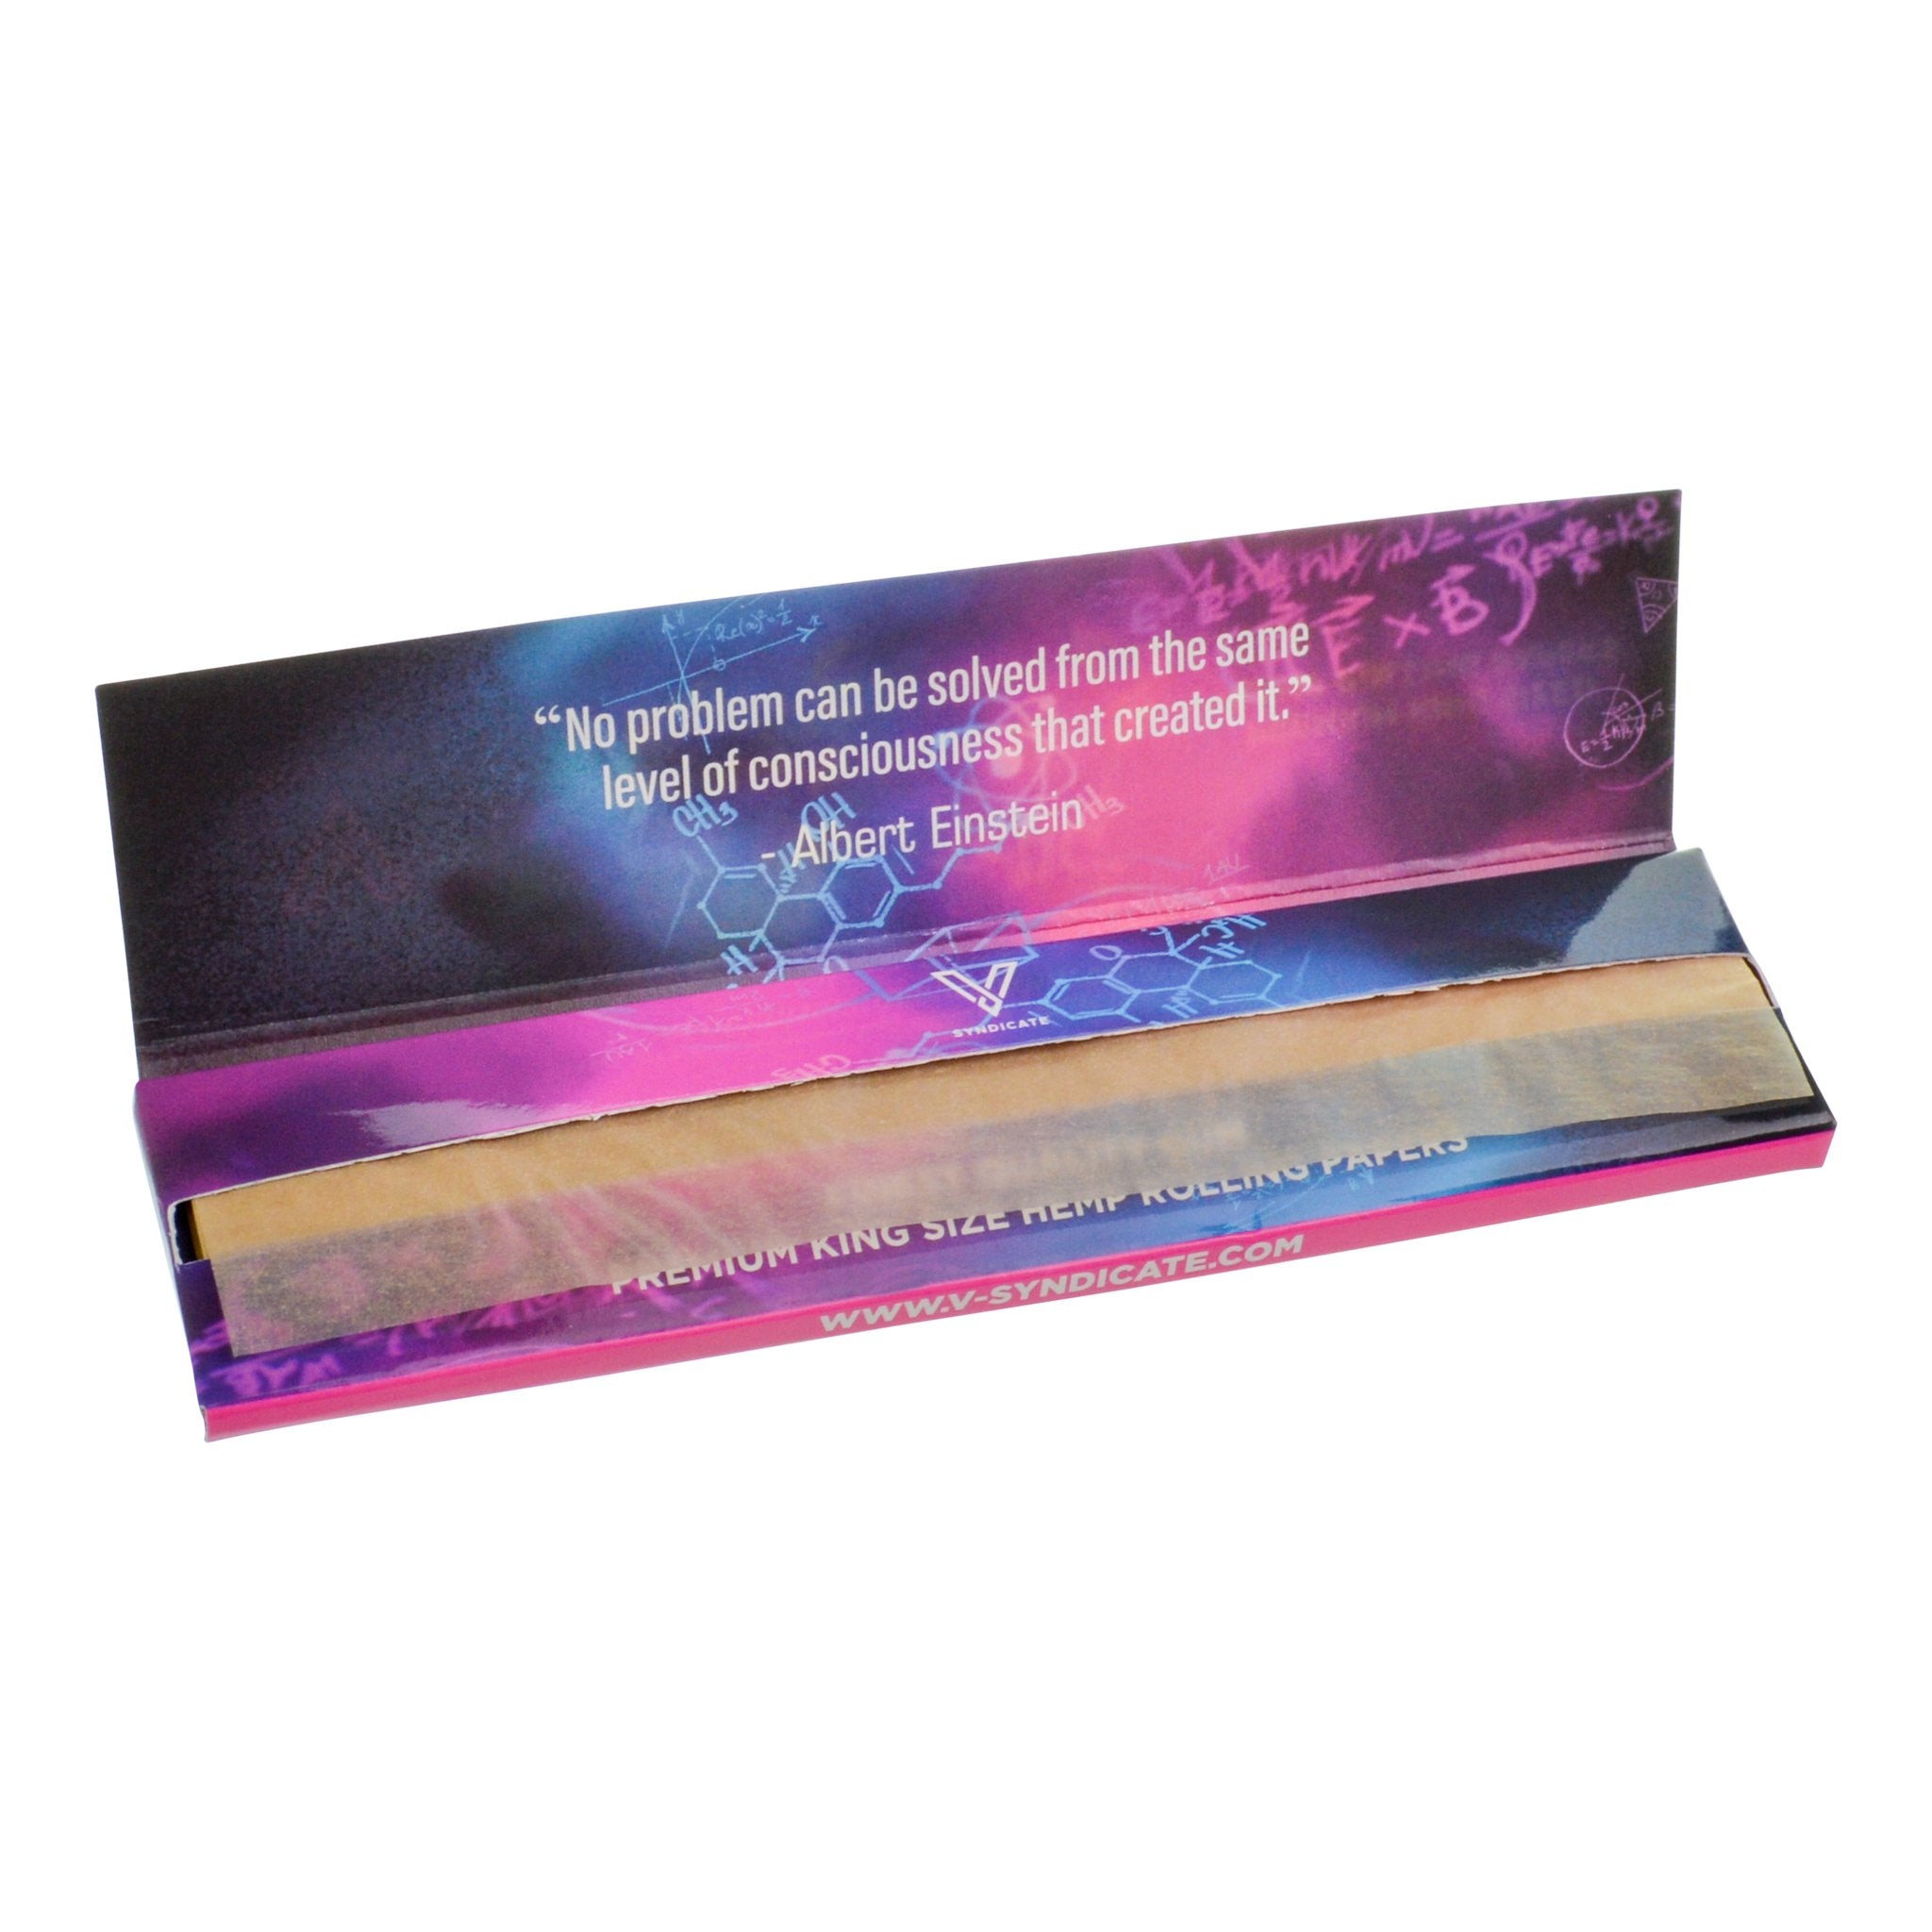 V Syndicate Hemp Rolling Papers - 2 Pack